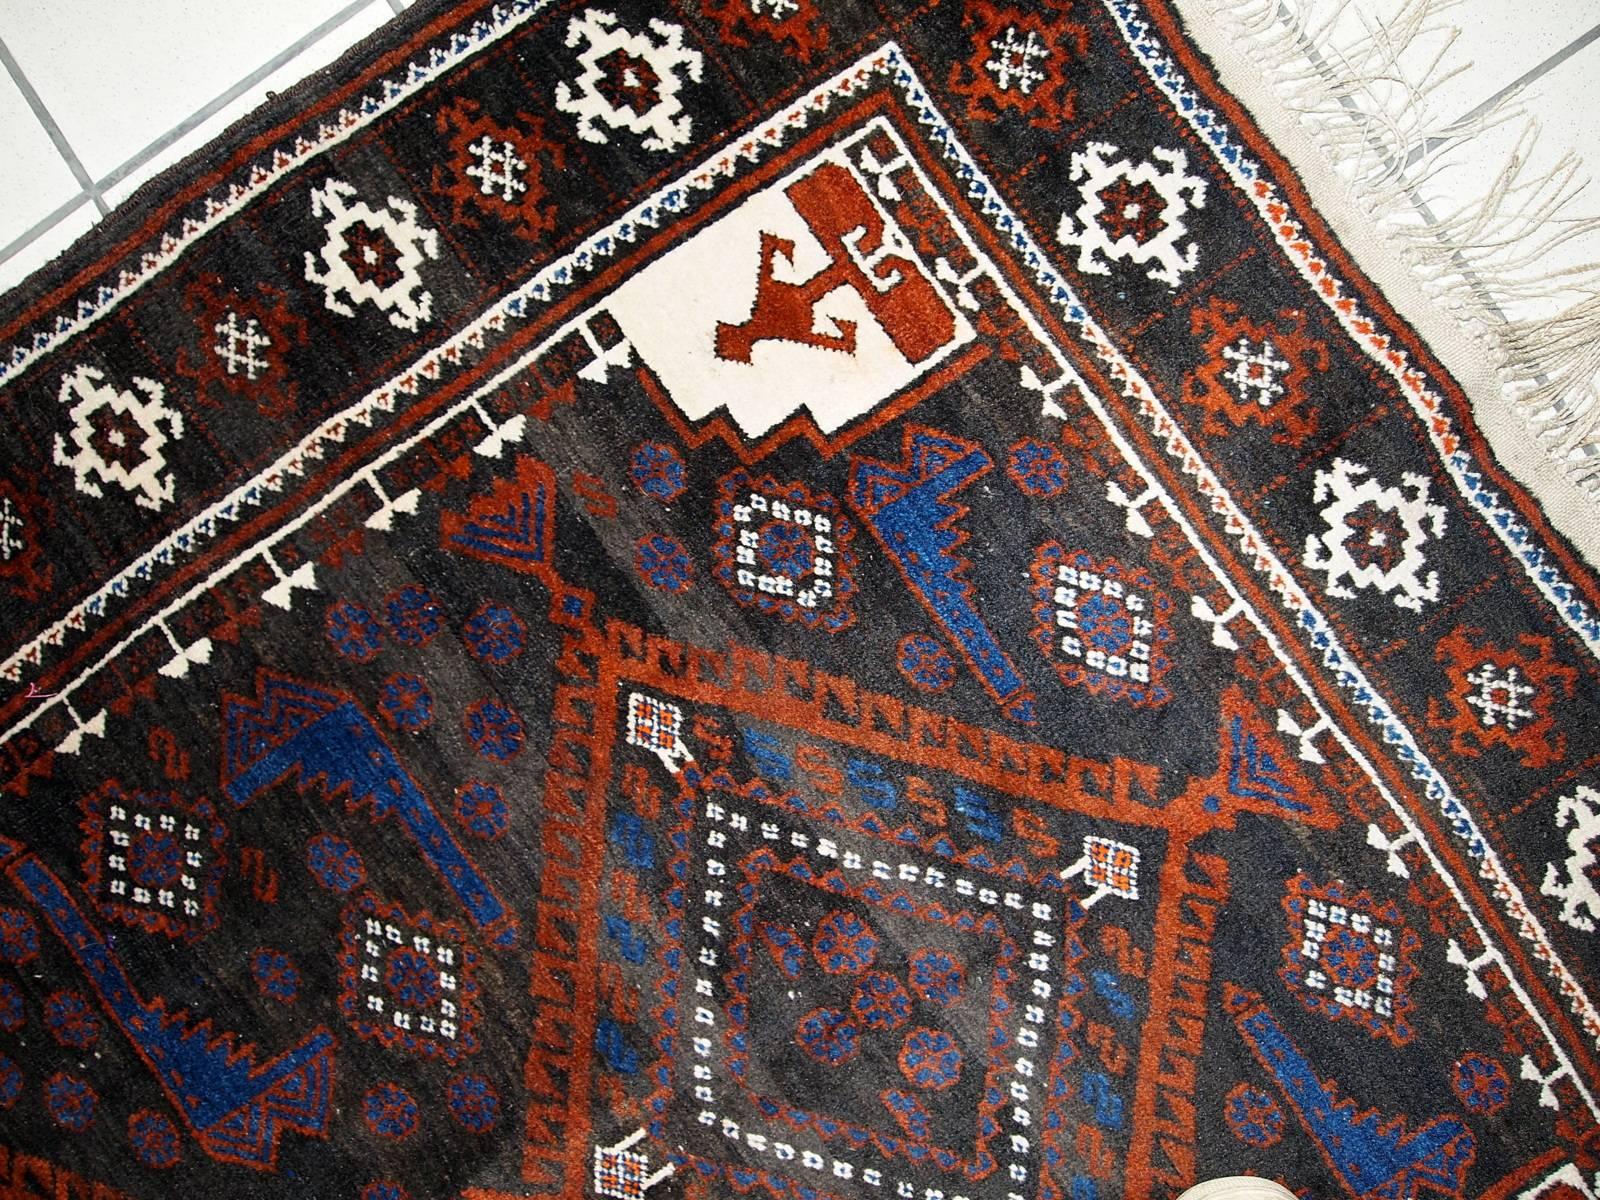 Vintage handmade Afghan Baluch rug. Rusty red, bright blue and white tribal figures are spread around chocolate brown field of this rug. The rug is vintage and it's style represents Afghan culture of 1930s. The rug is quite dark, so will be perfect